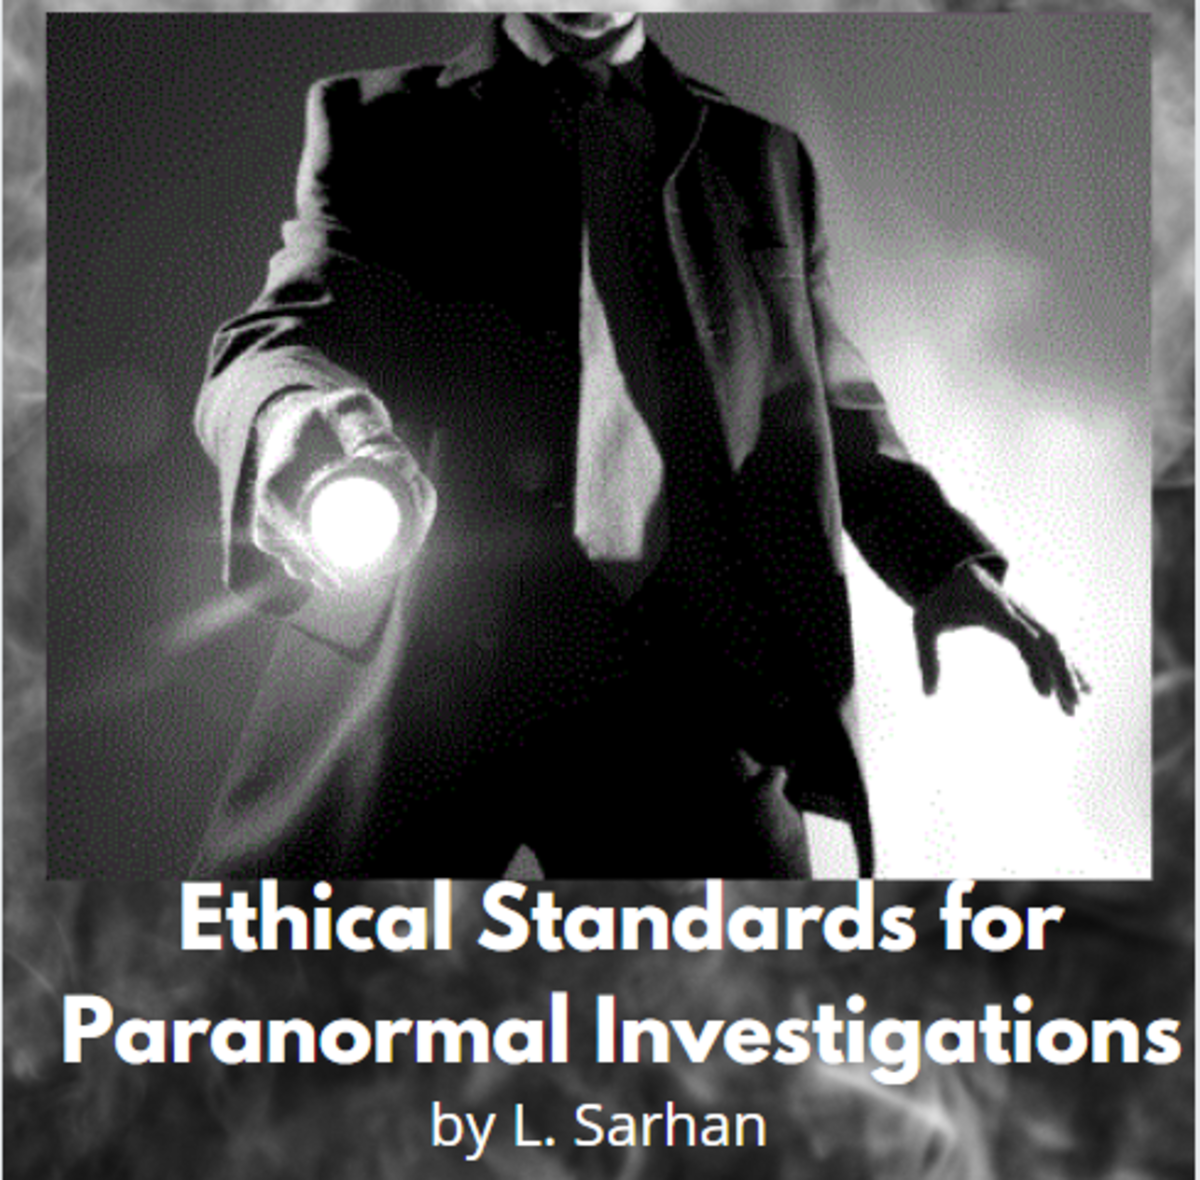 Ethical Standards for Paranormal Investigations